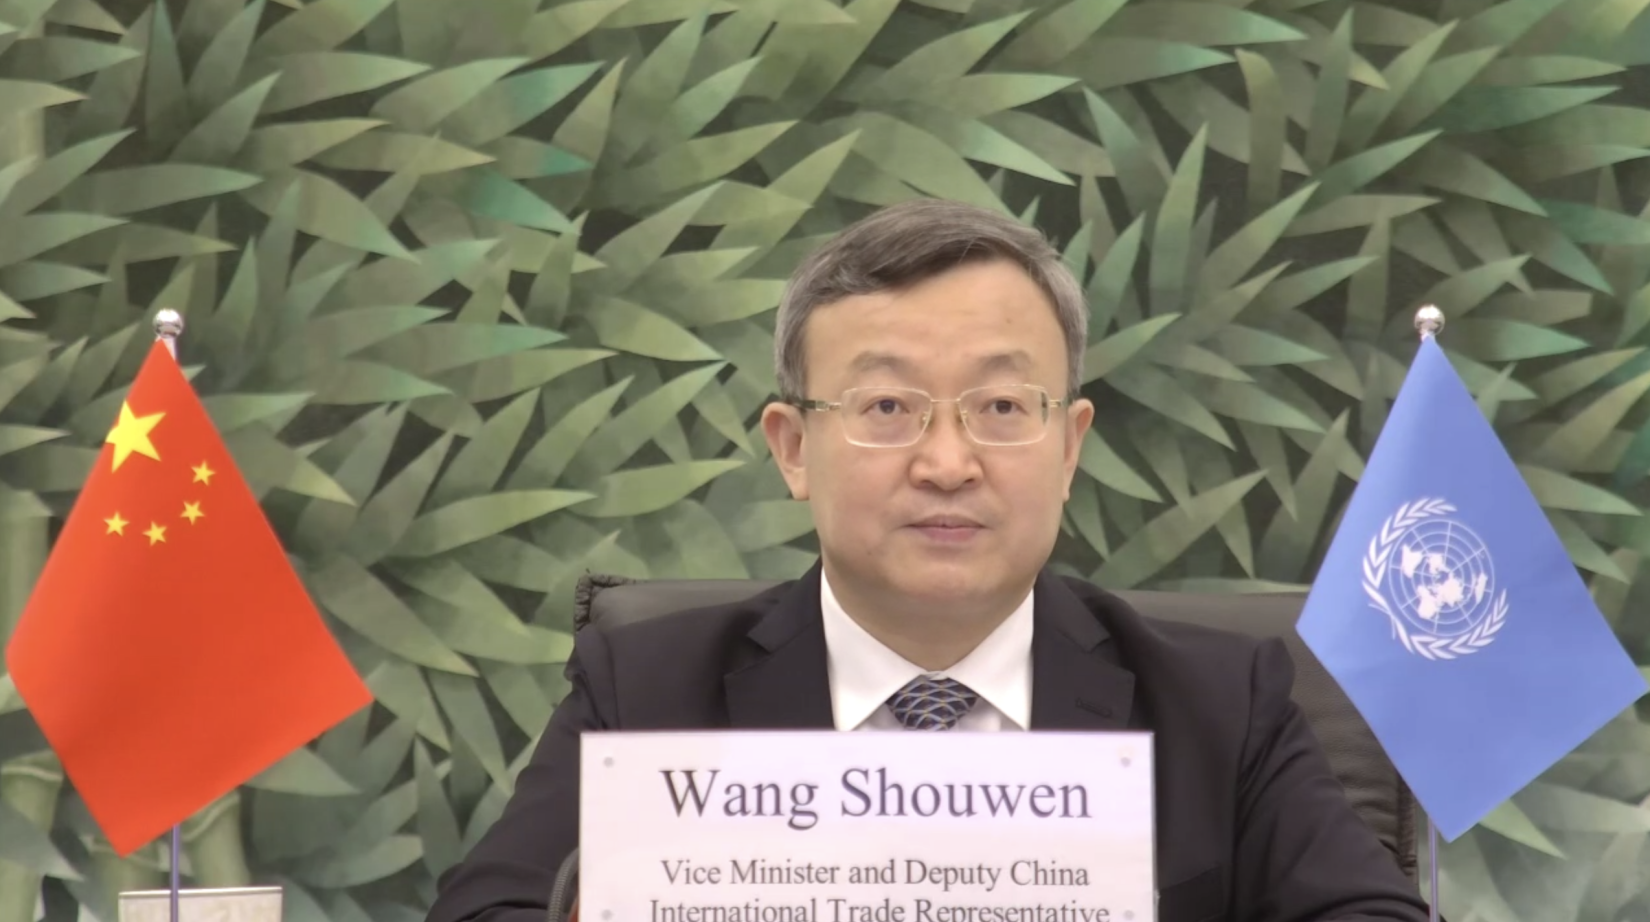 Wang Shouwen, Vice Minister of Commerce